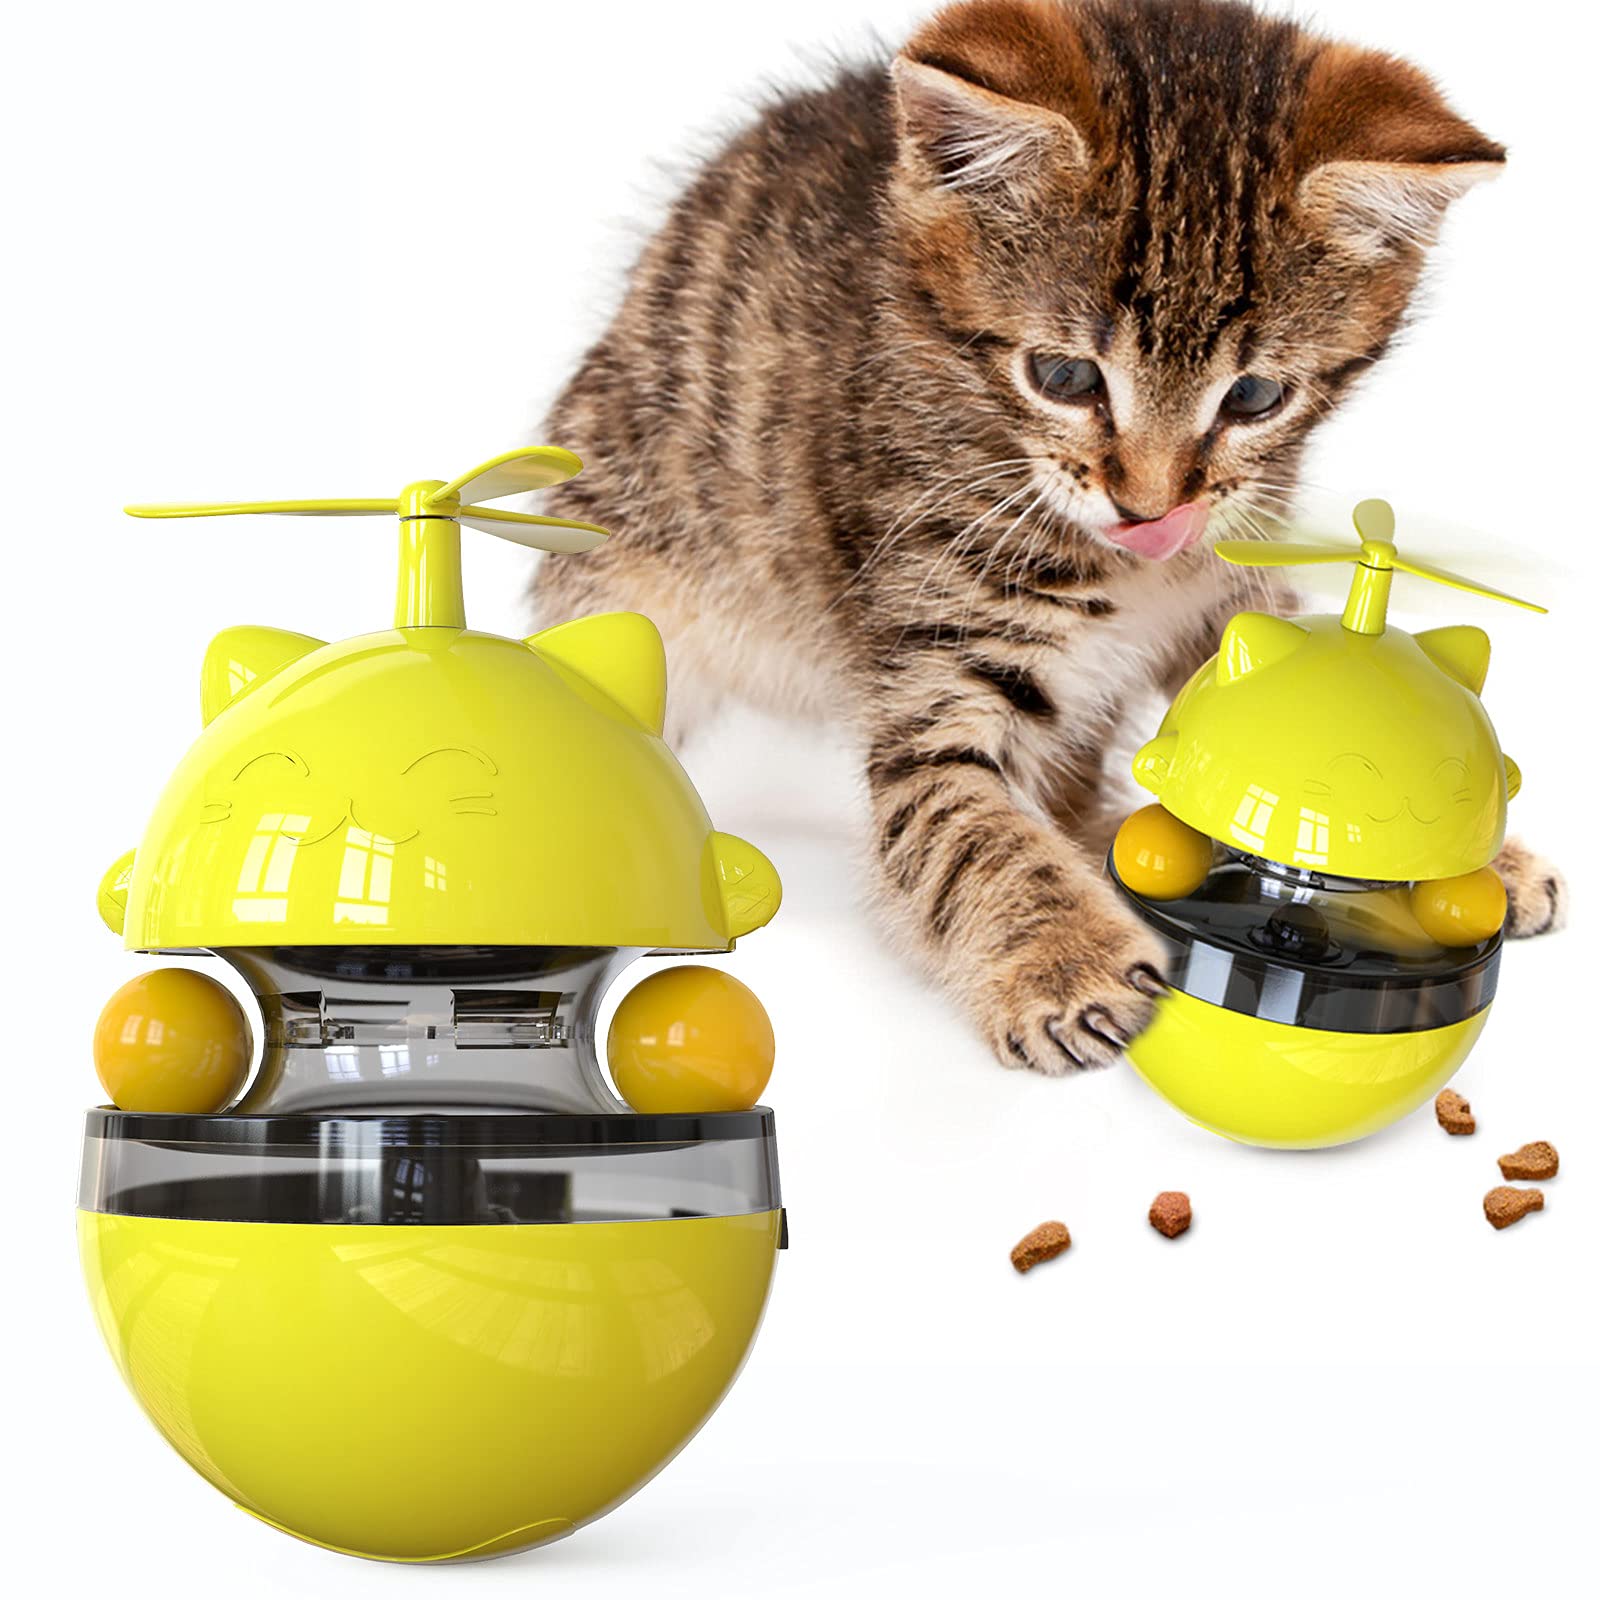 Danlai-1/2/3/4Pieces Cat Toy Tumbler, Cat Food Dispenser, Iq Ball Chase  Play Eat, Slow Food Feeder, Funny Cat Stick, Cat And Kitten Toys,  Interactive Sports 